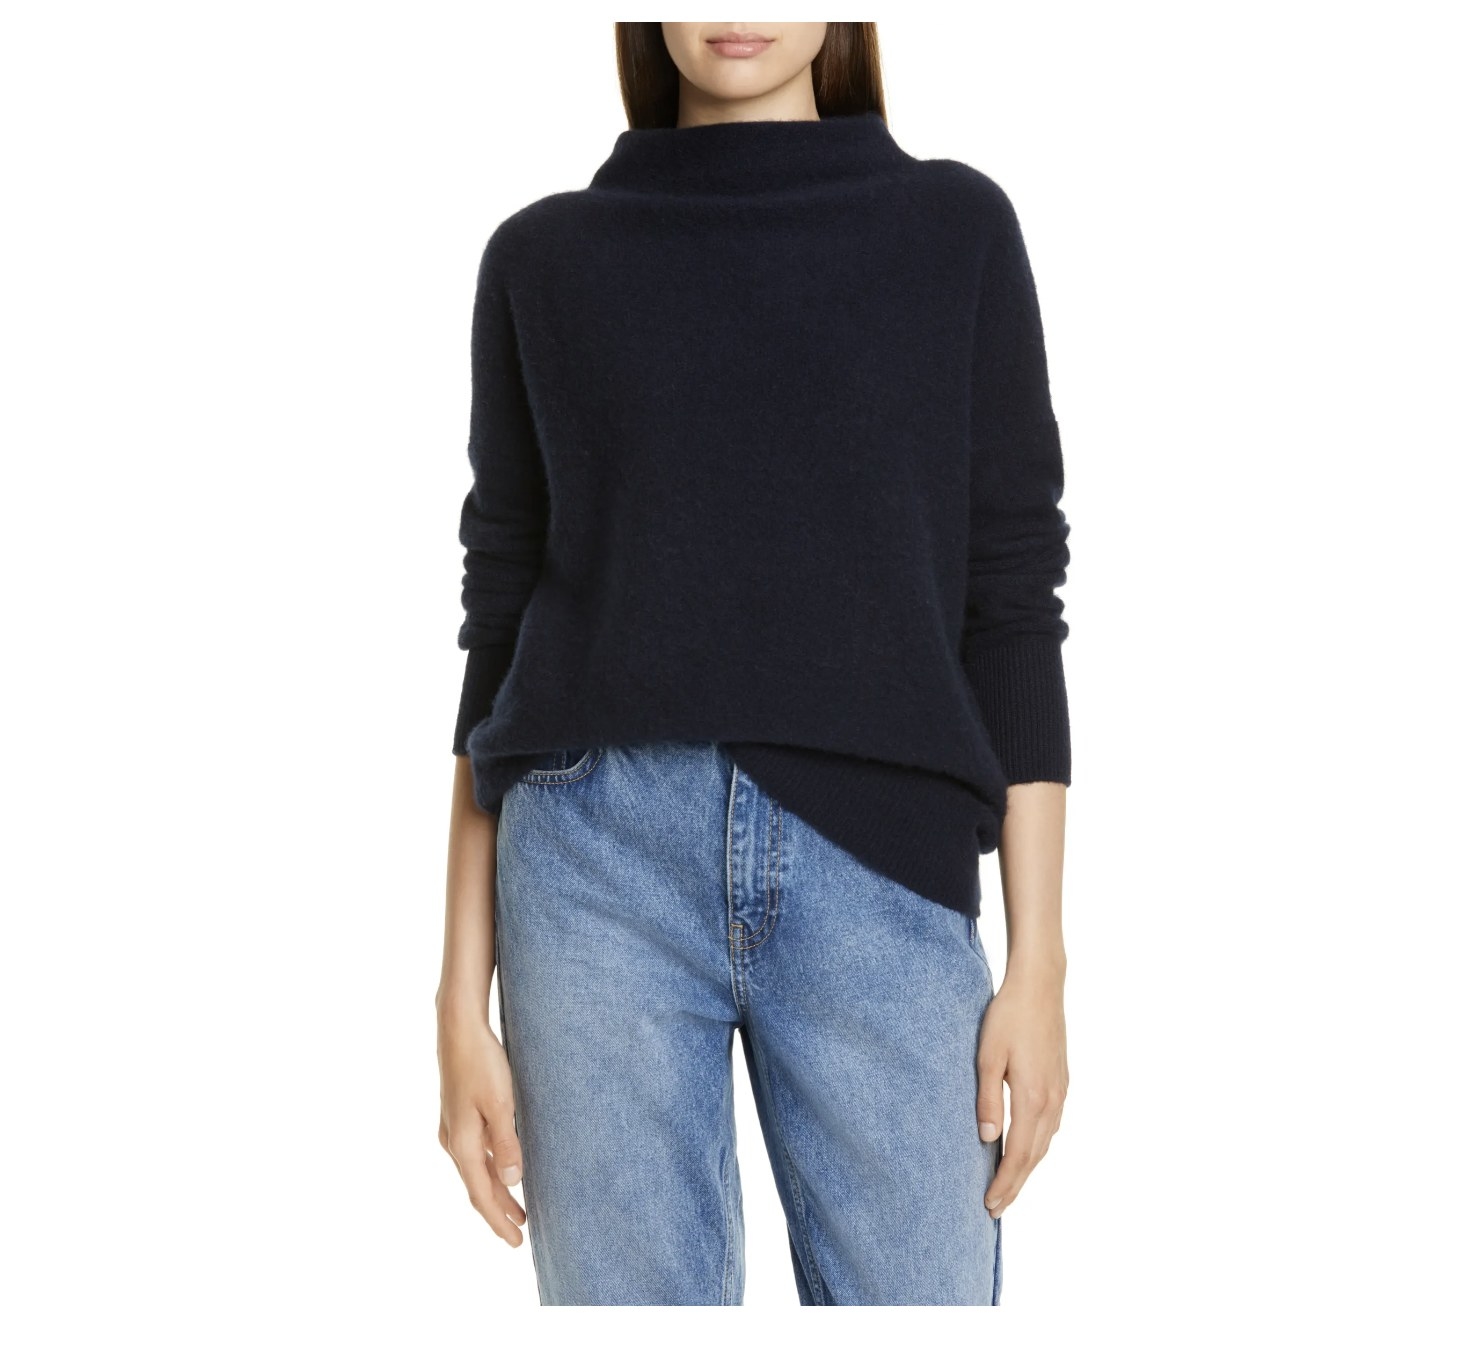 the sweater in navy